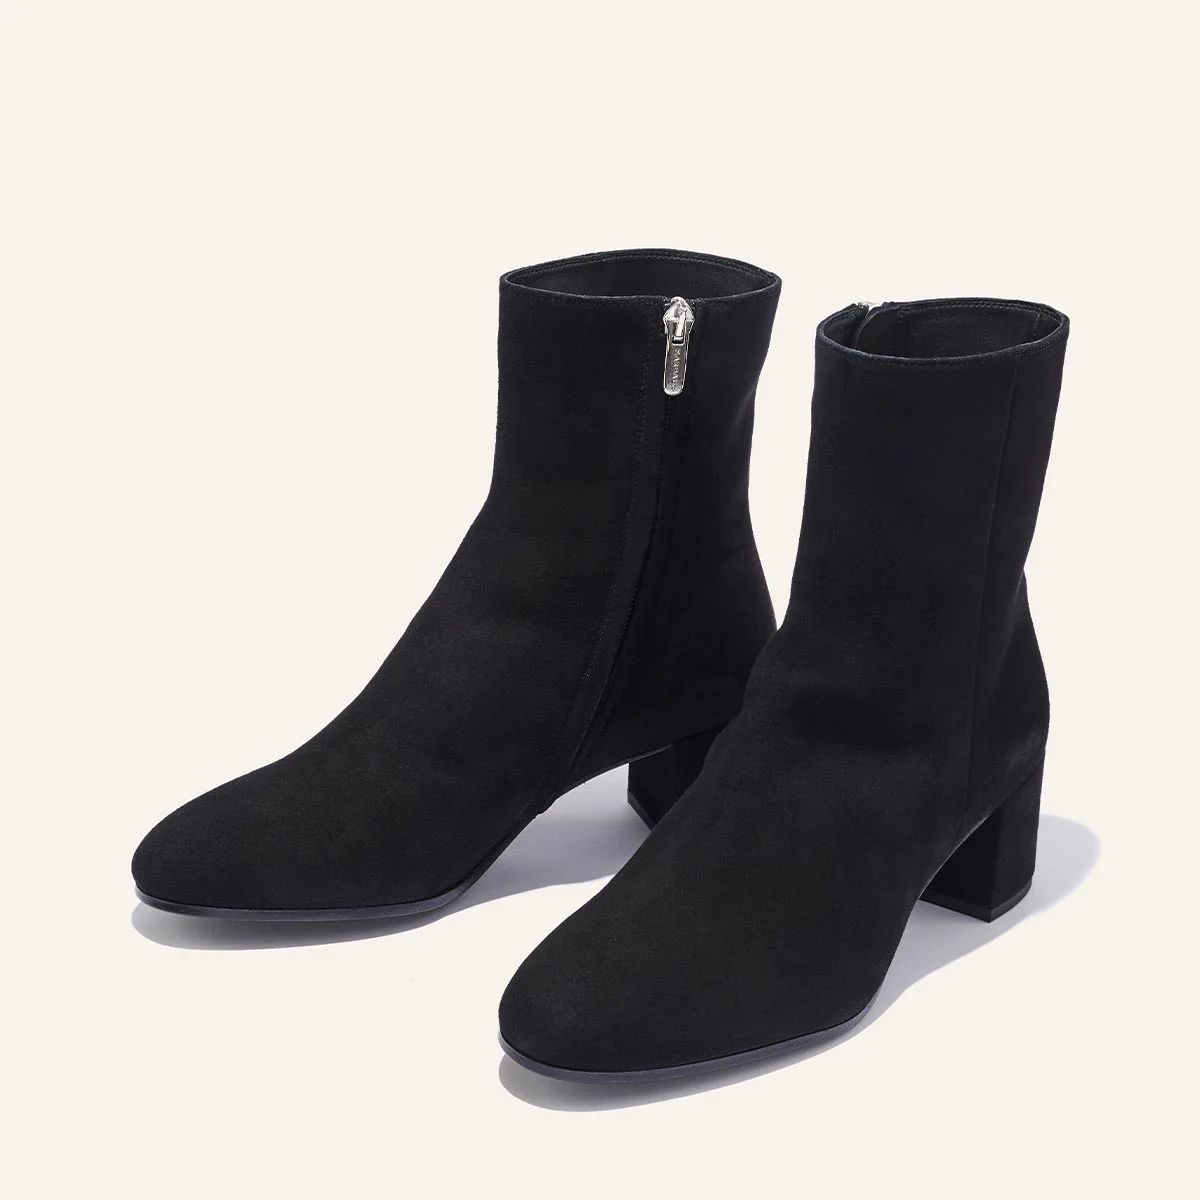 The Boot - Black Suede | Margaux